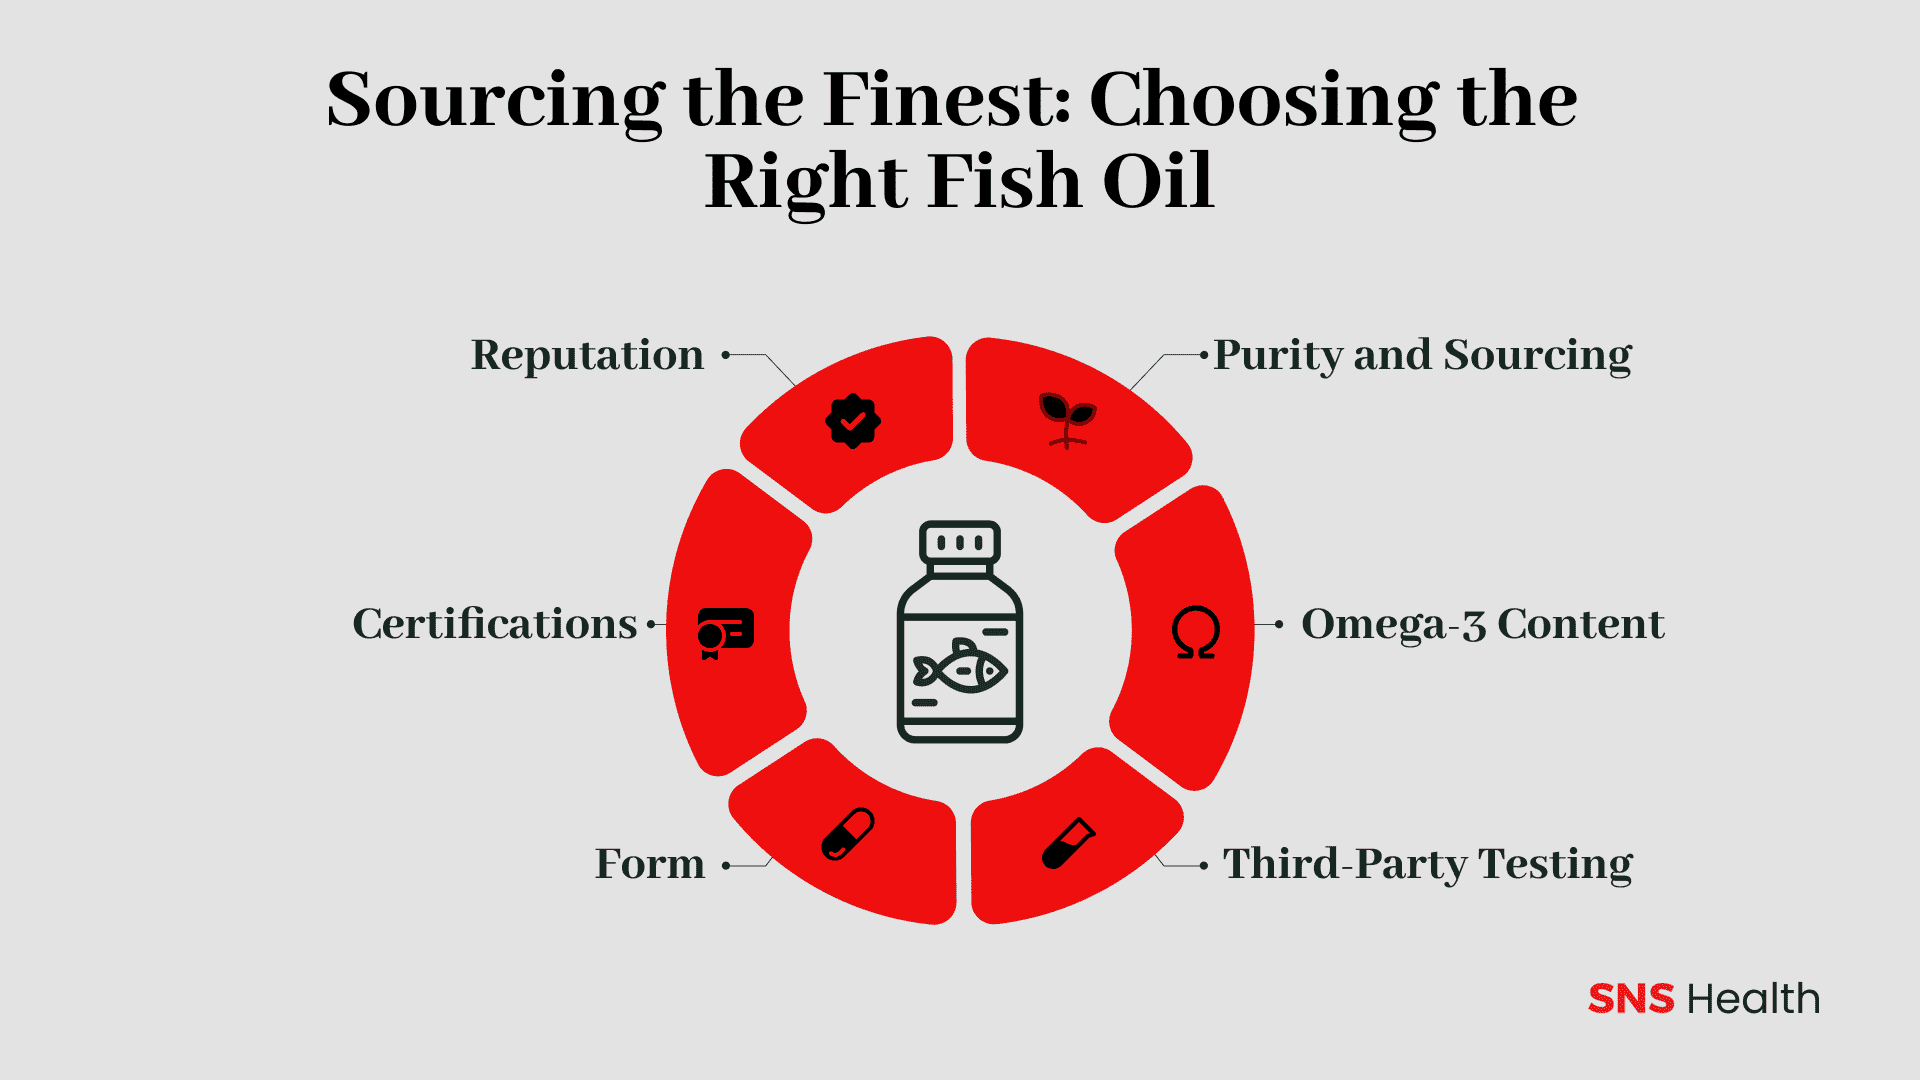 Sourcing the Finest: Choosing the Right Fish Oil